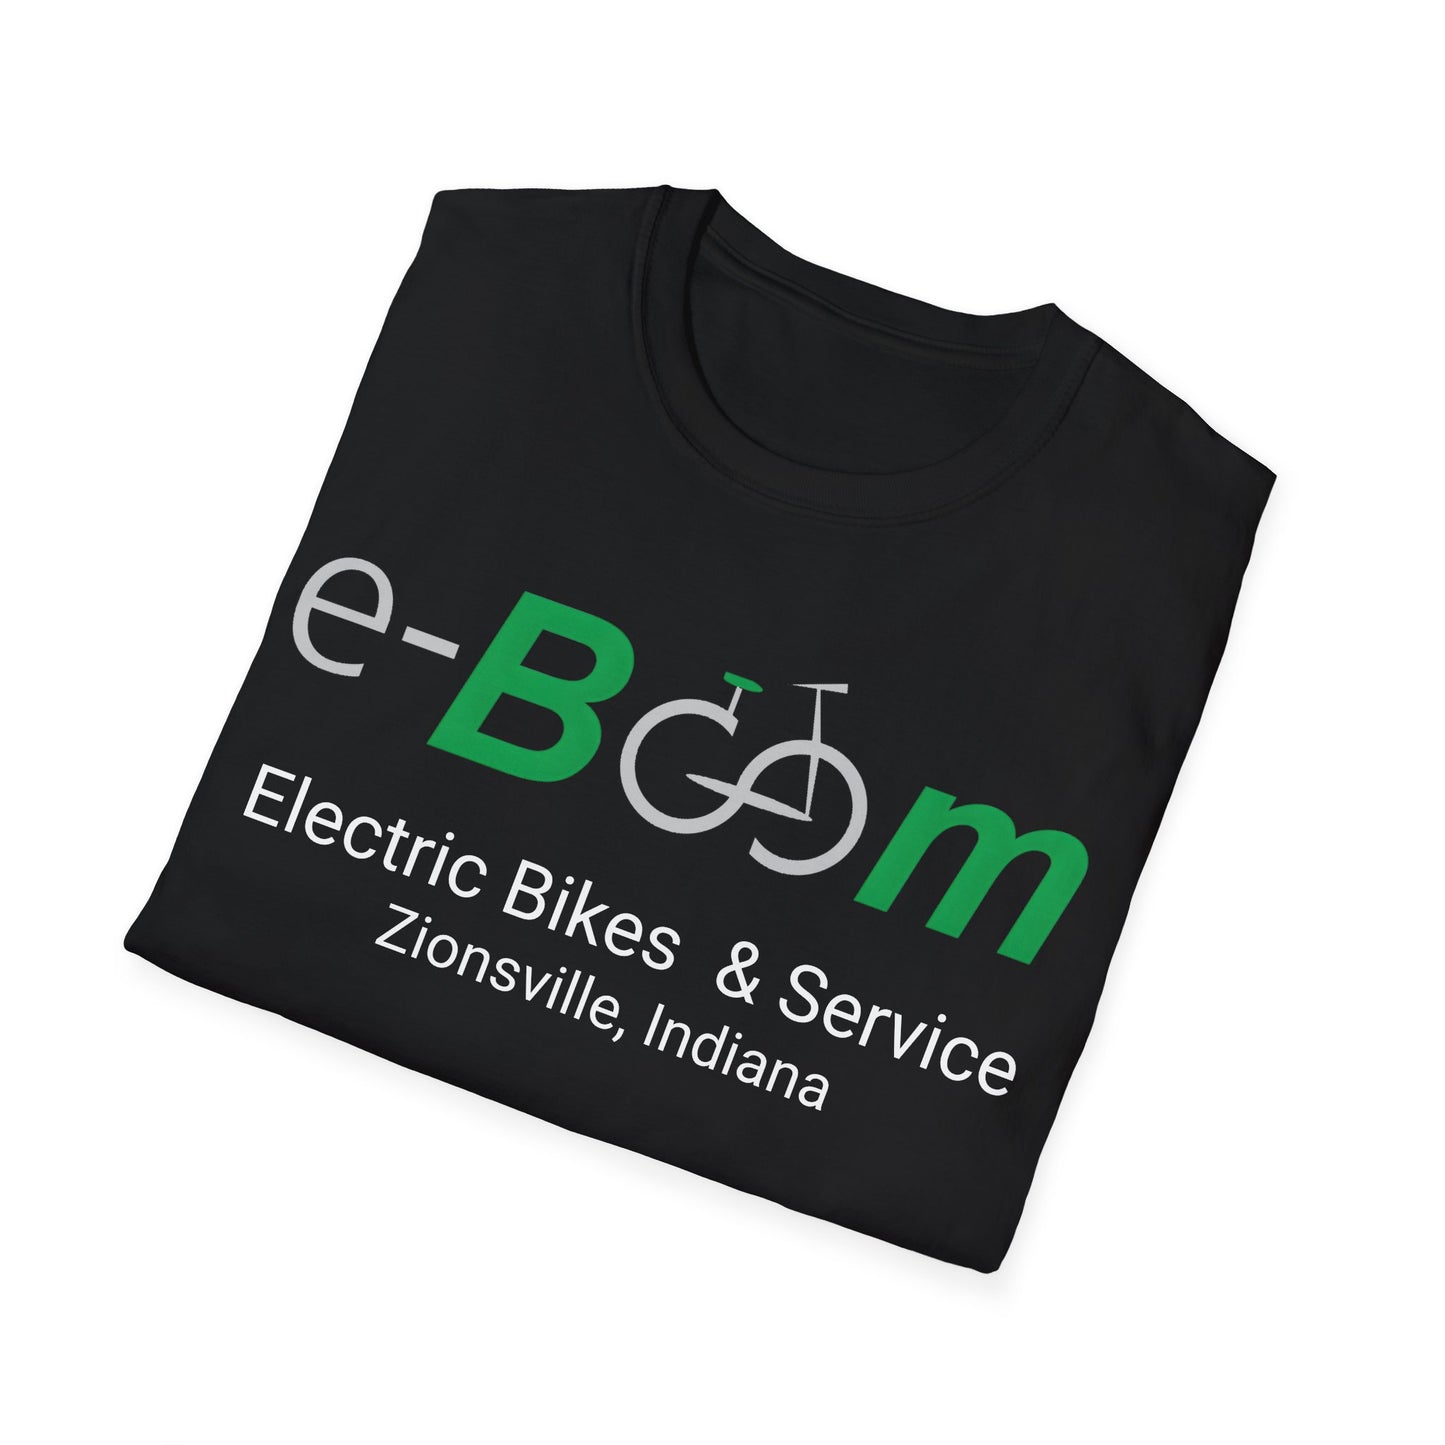 "Electric Bikes. Because Hills Suck." (Back of shirt) Various colors. Unisex Softstyle T-Shirt